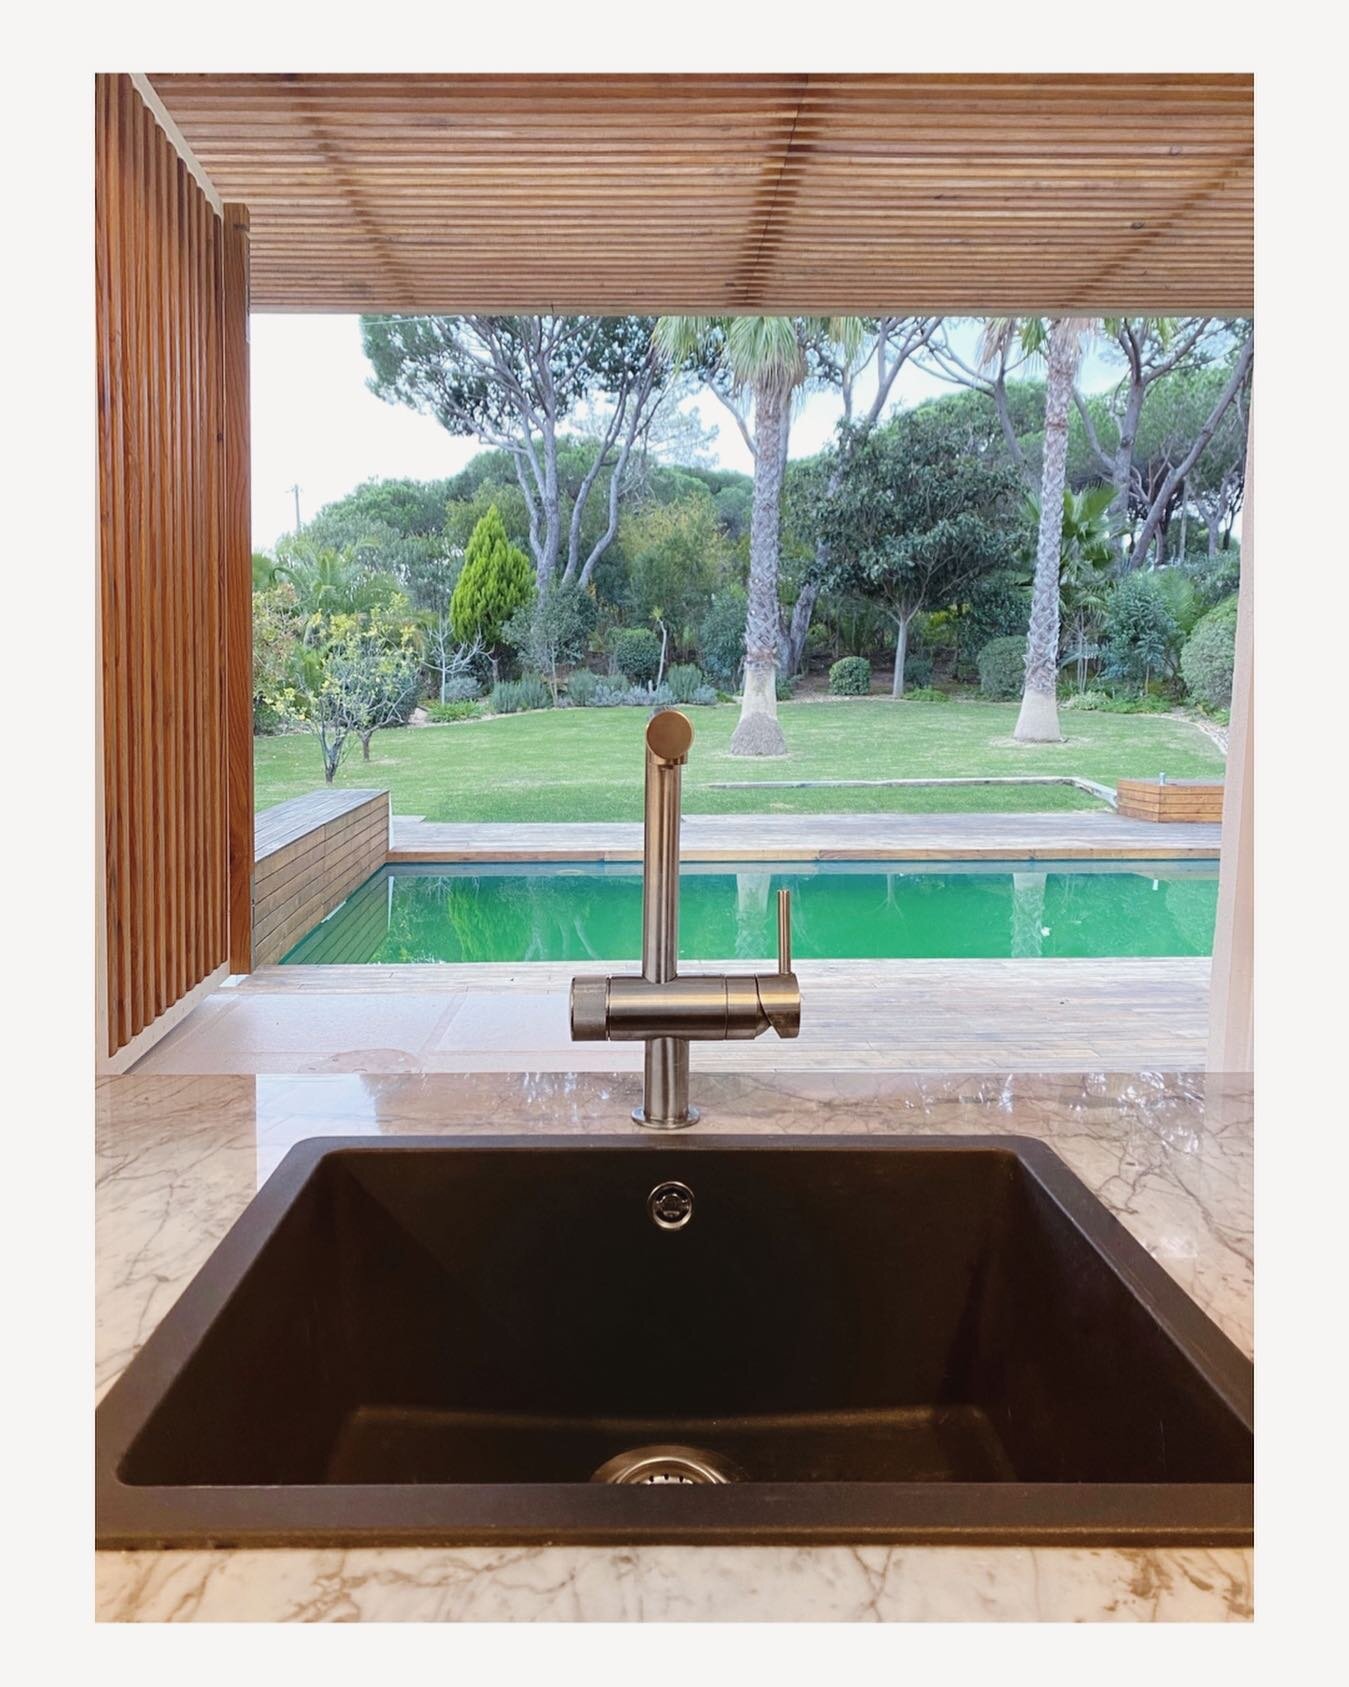 Do the dishes relaxes me... sometimes🙄... So I always pay attention to the sink area. At the end is the sum of all details that create a cozy house. And this green pool and the wood pergola 😍 Kitchen view in Casa CS